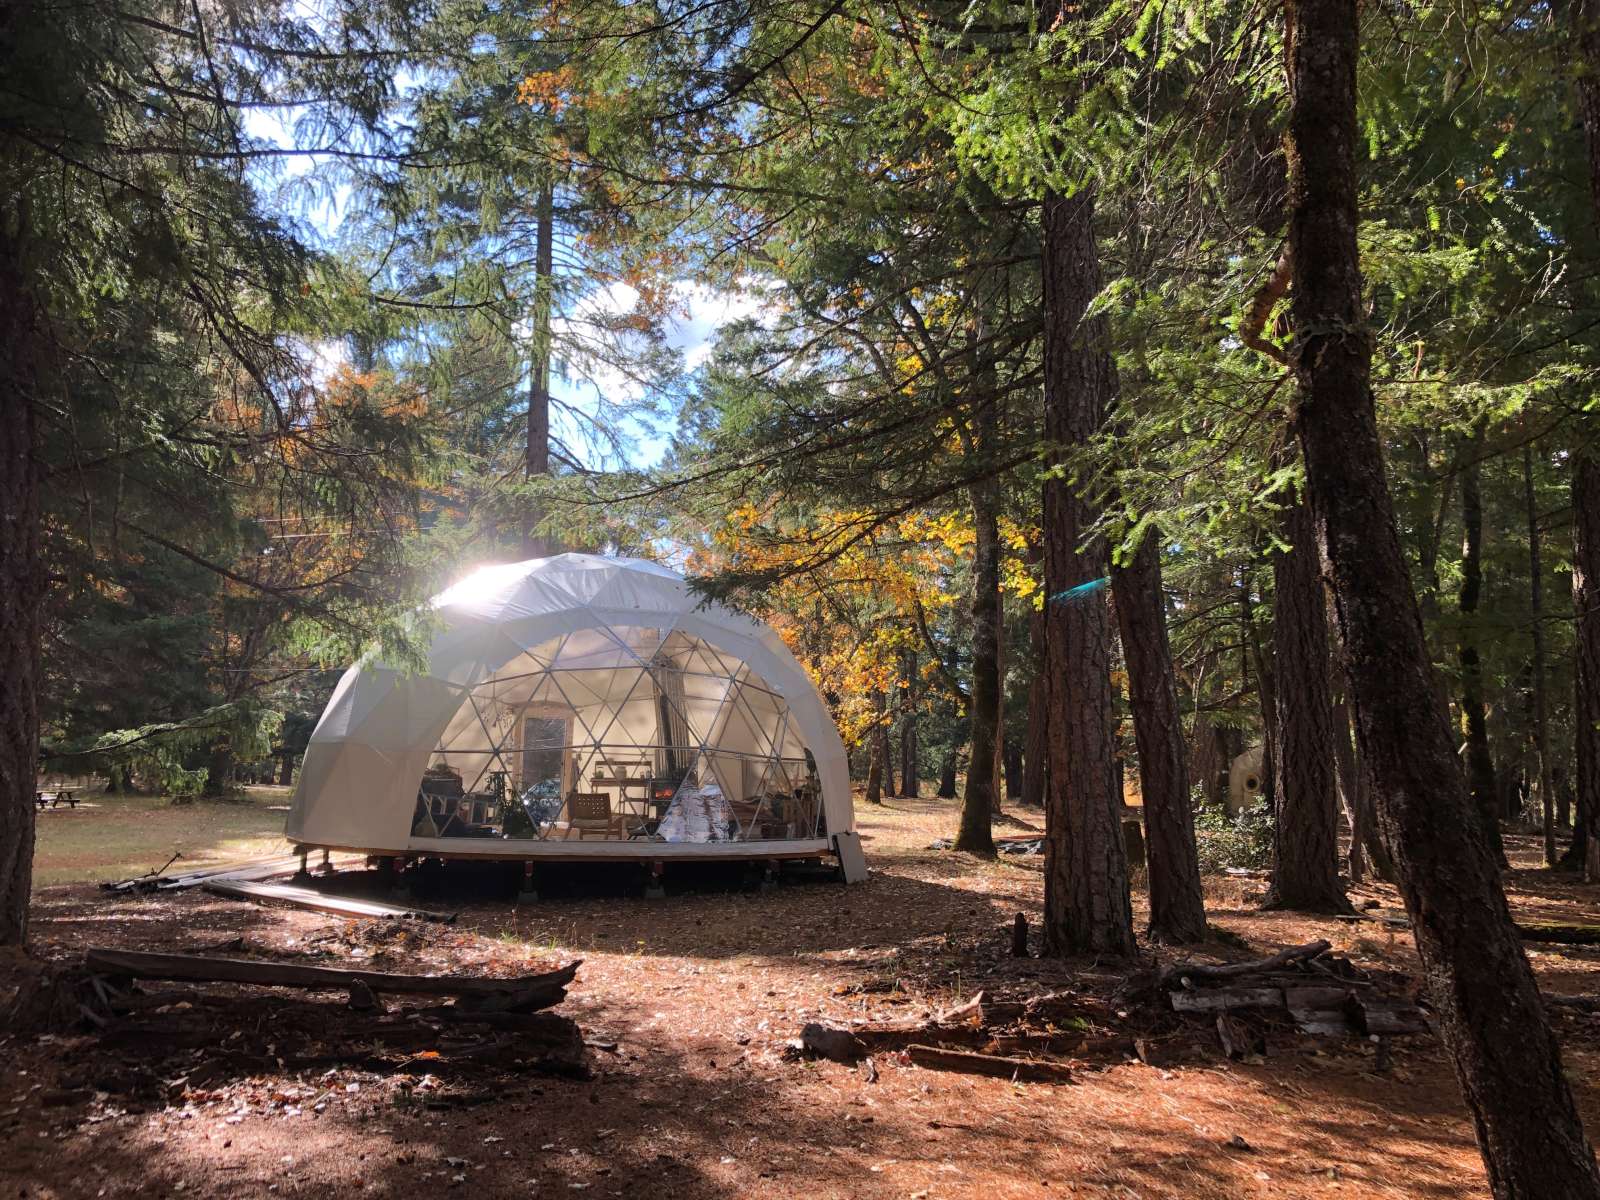 Replenish Your Soul At This Unique ‘River Overlook Dome’ In An Oregon Forest